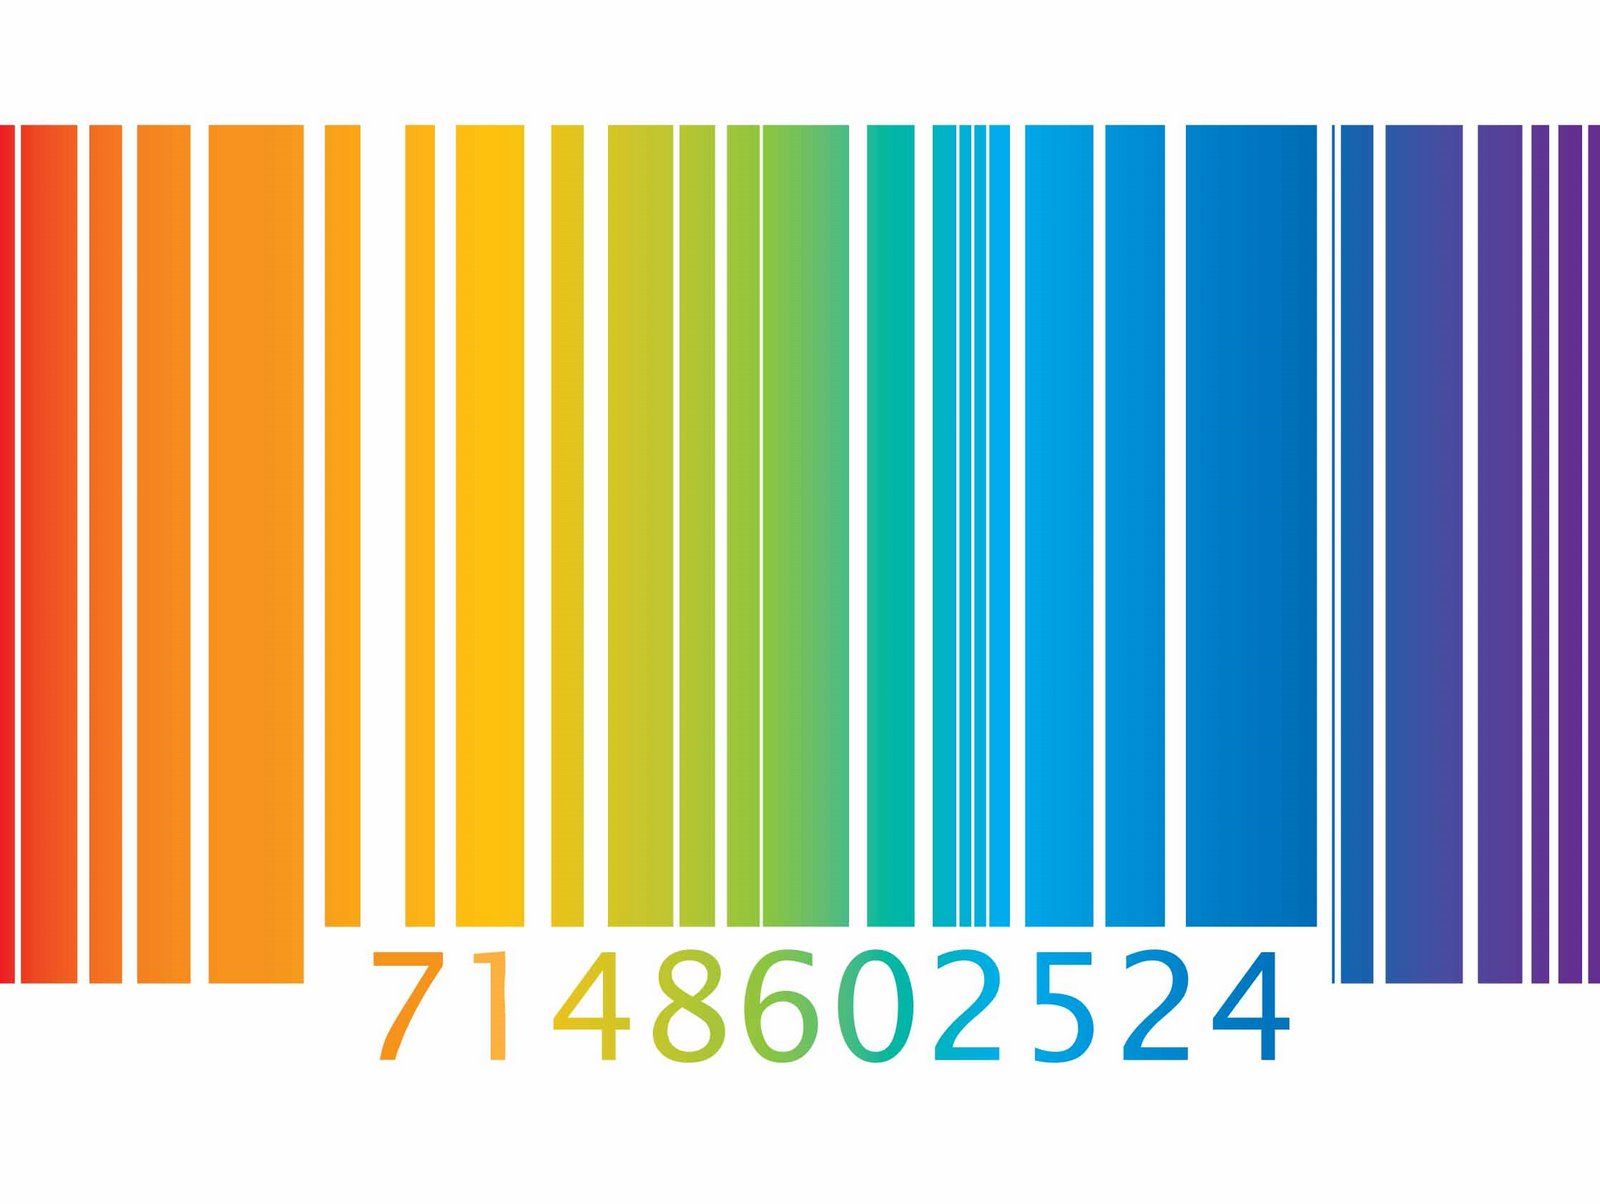 barcodes clipart